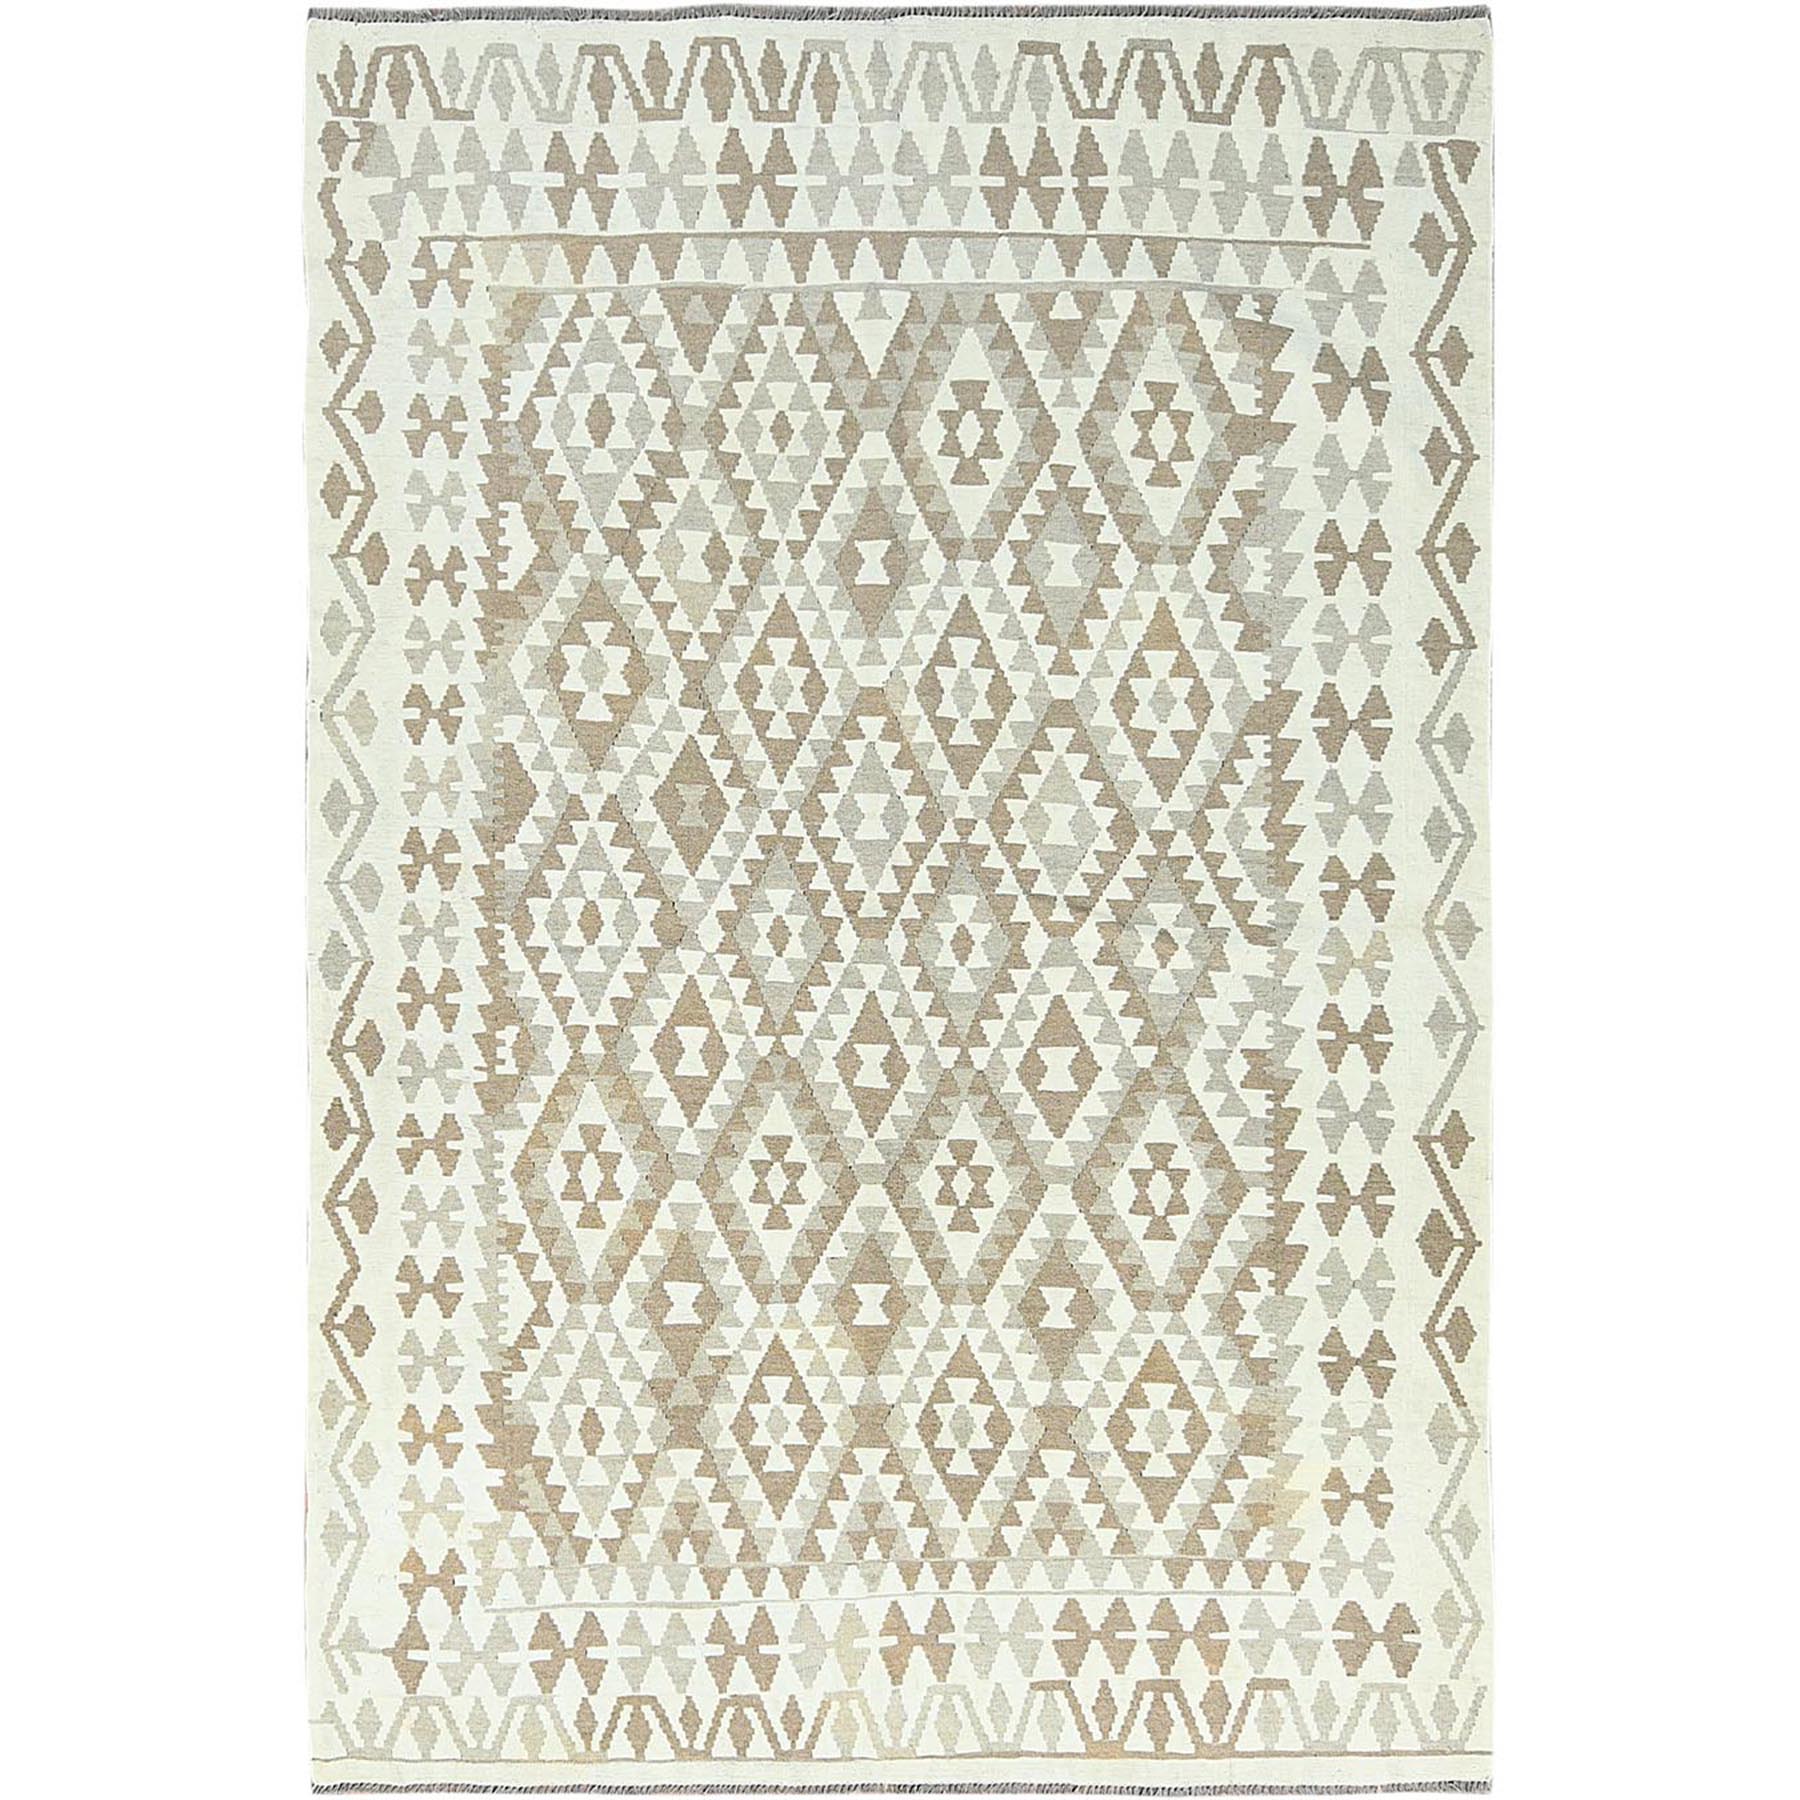 traditional Wool Hand-Woven Area Rug 6'5